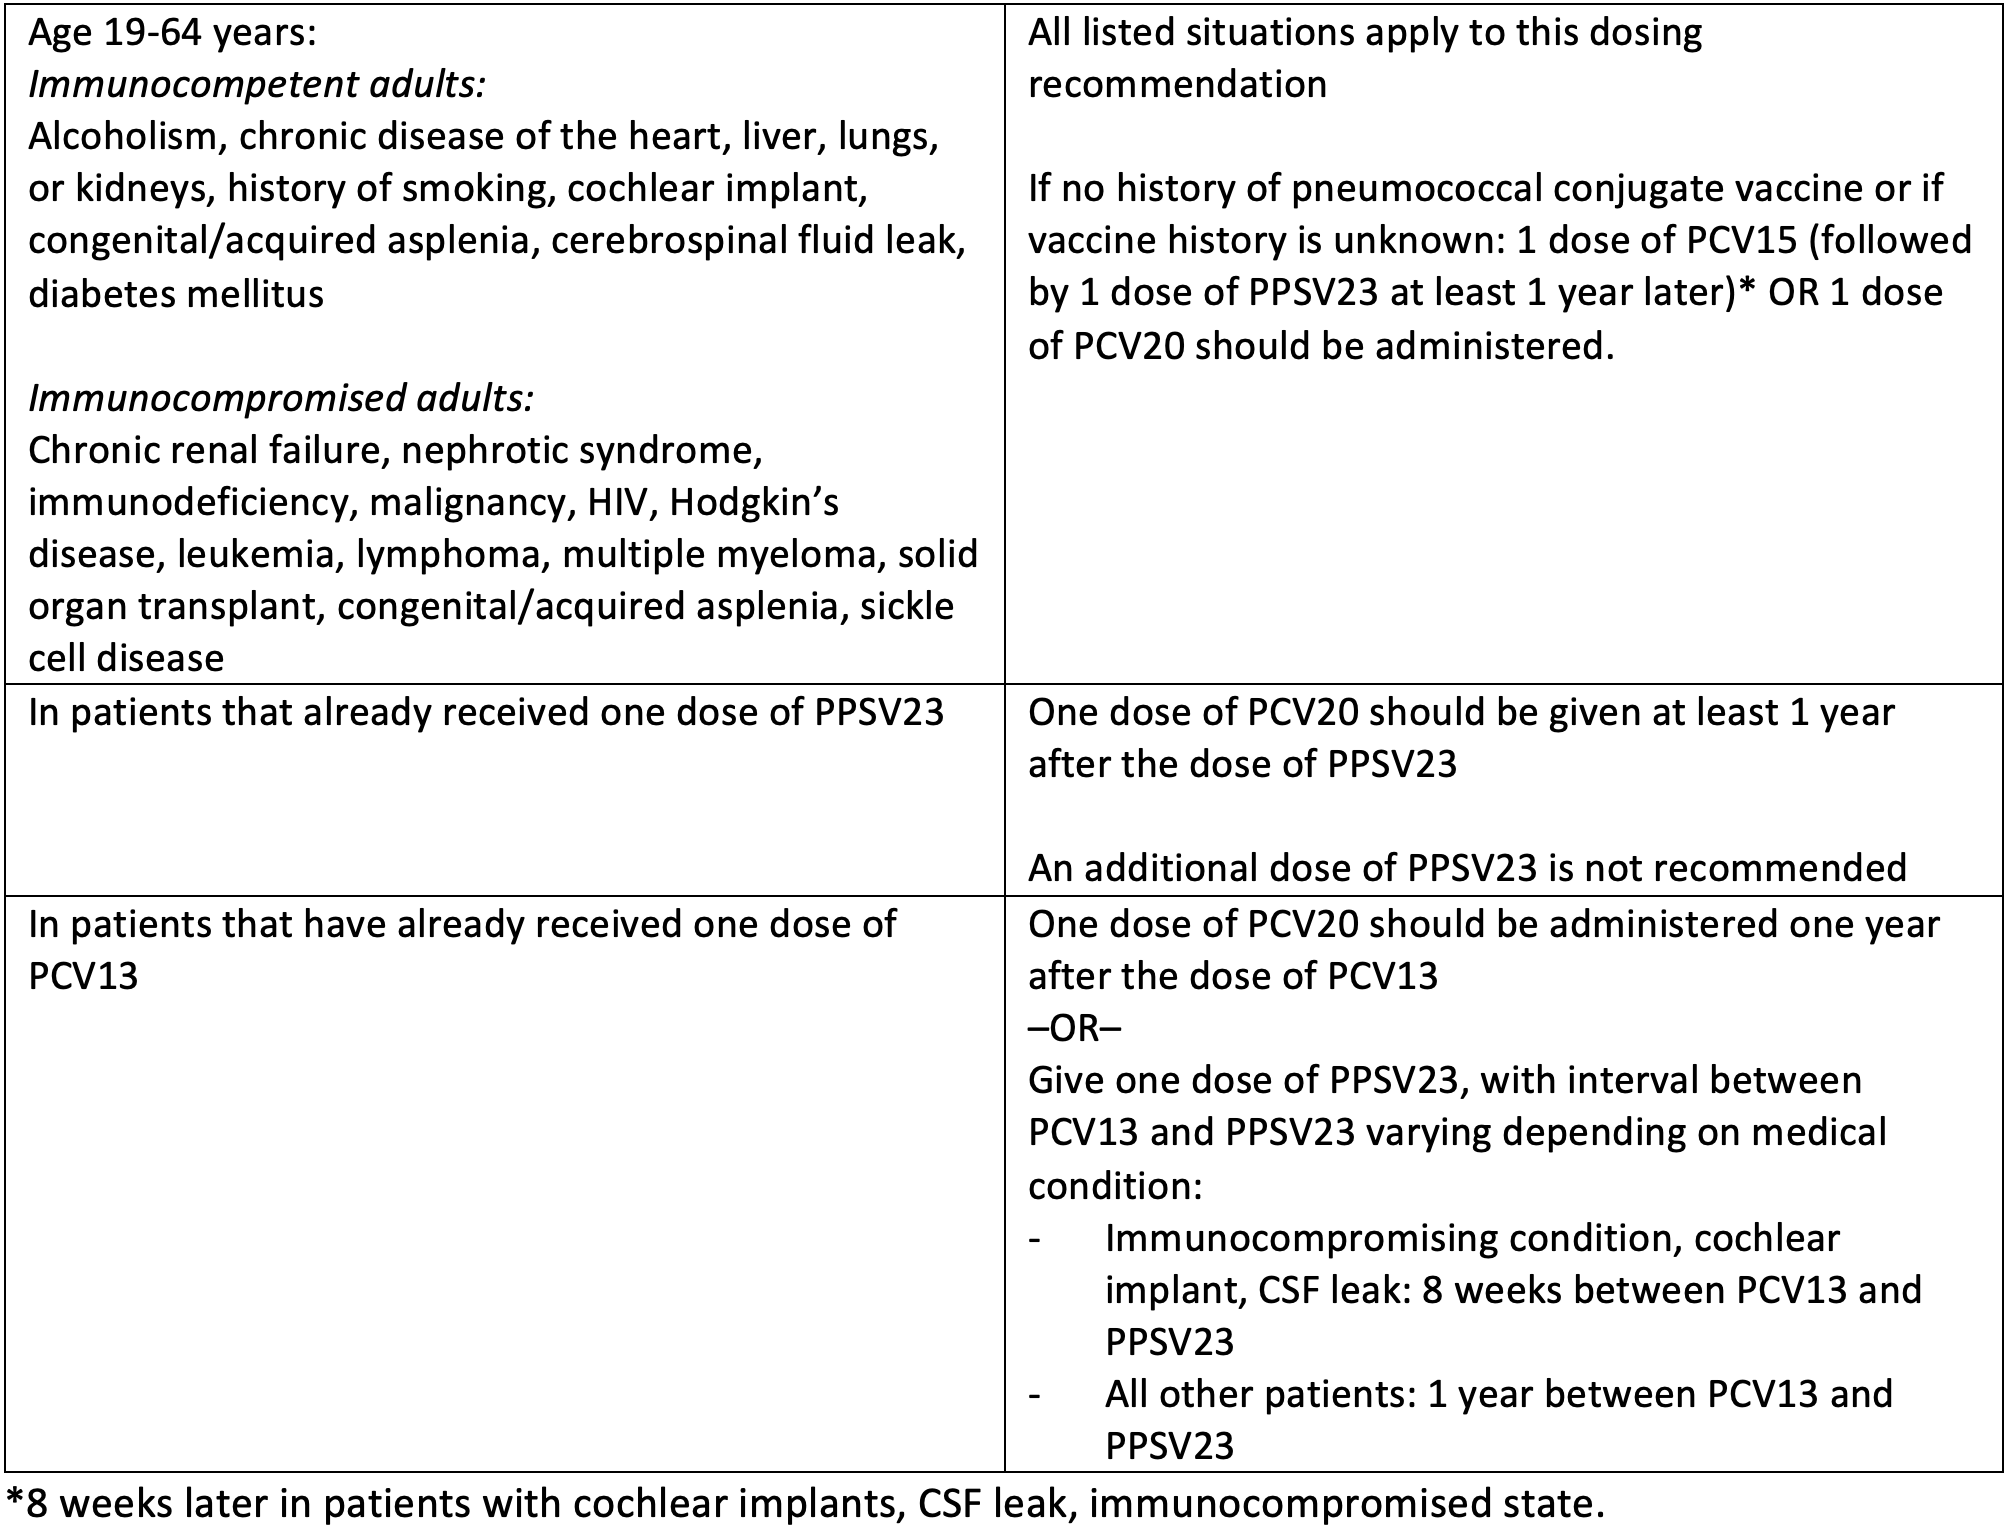 Table 2: Pneumococcal vaccination recommendations in adults